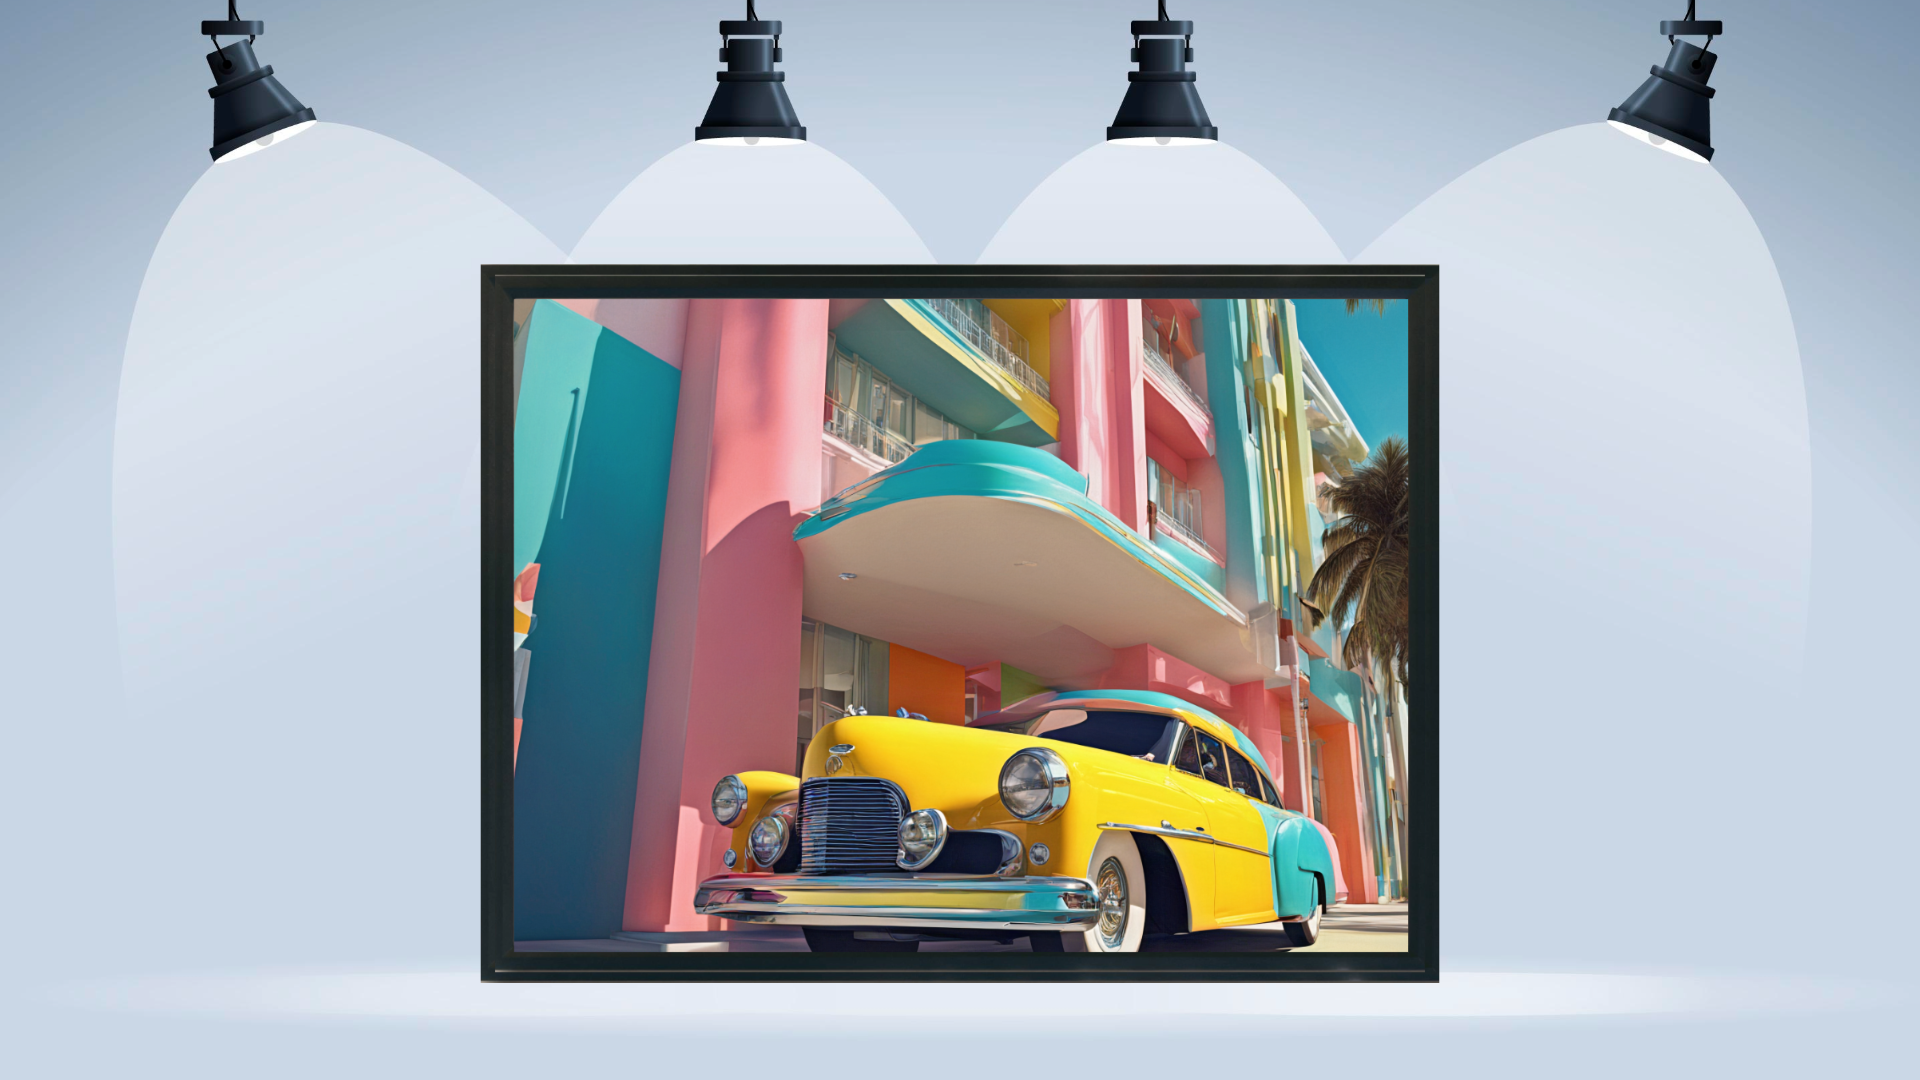 Wall Art MY NEW CAR Art Deco #1 Canvas Print Painting Original Giclee 40X30 + Frame Love Nice Beauty Fun Design Fit Hot House Home Office Gift Ready Hang